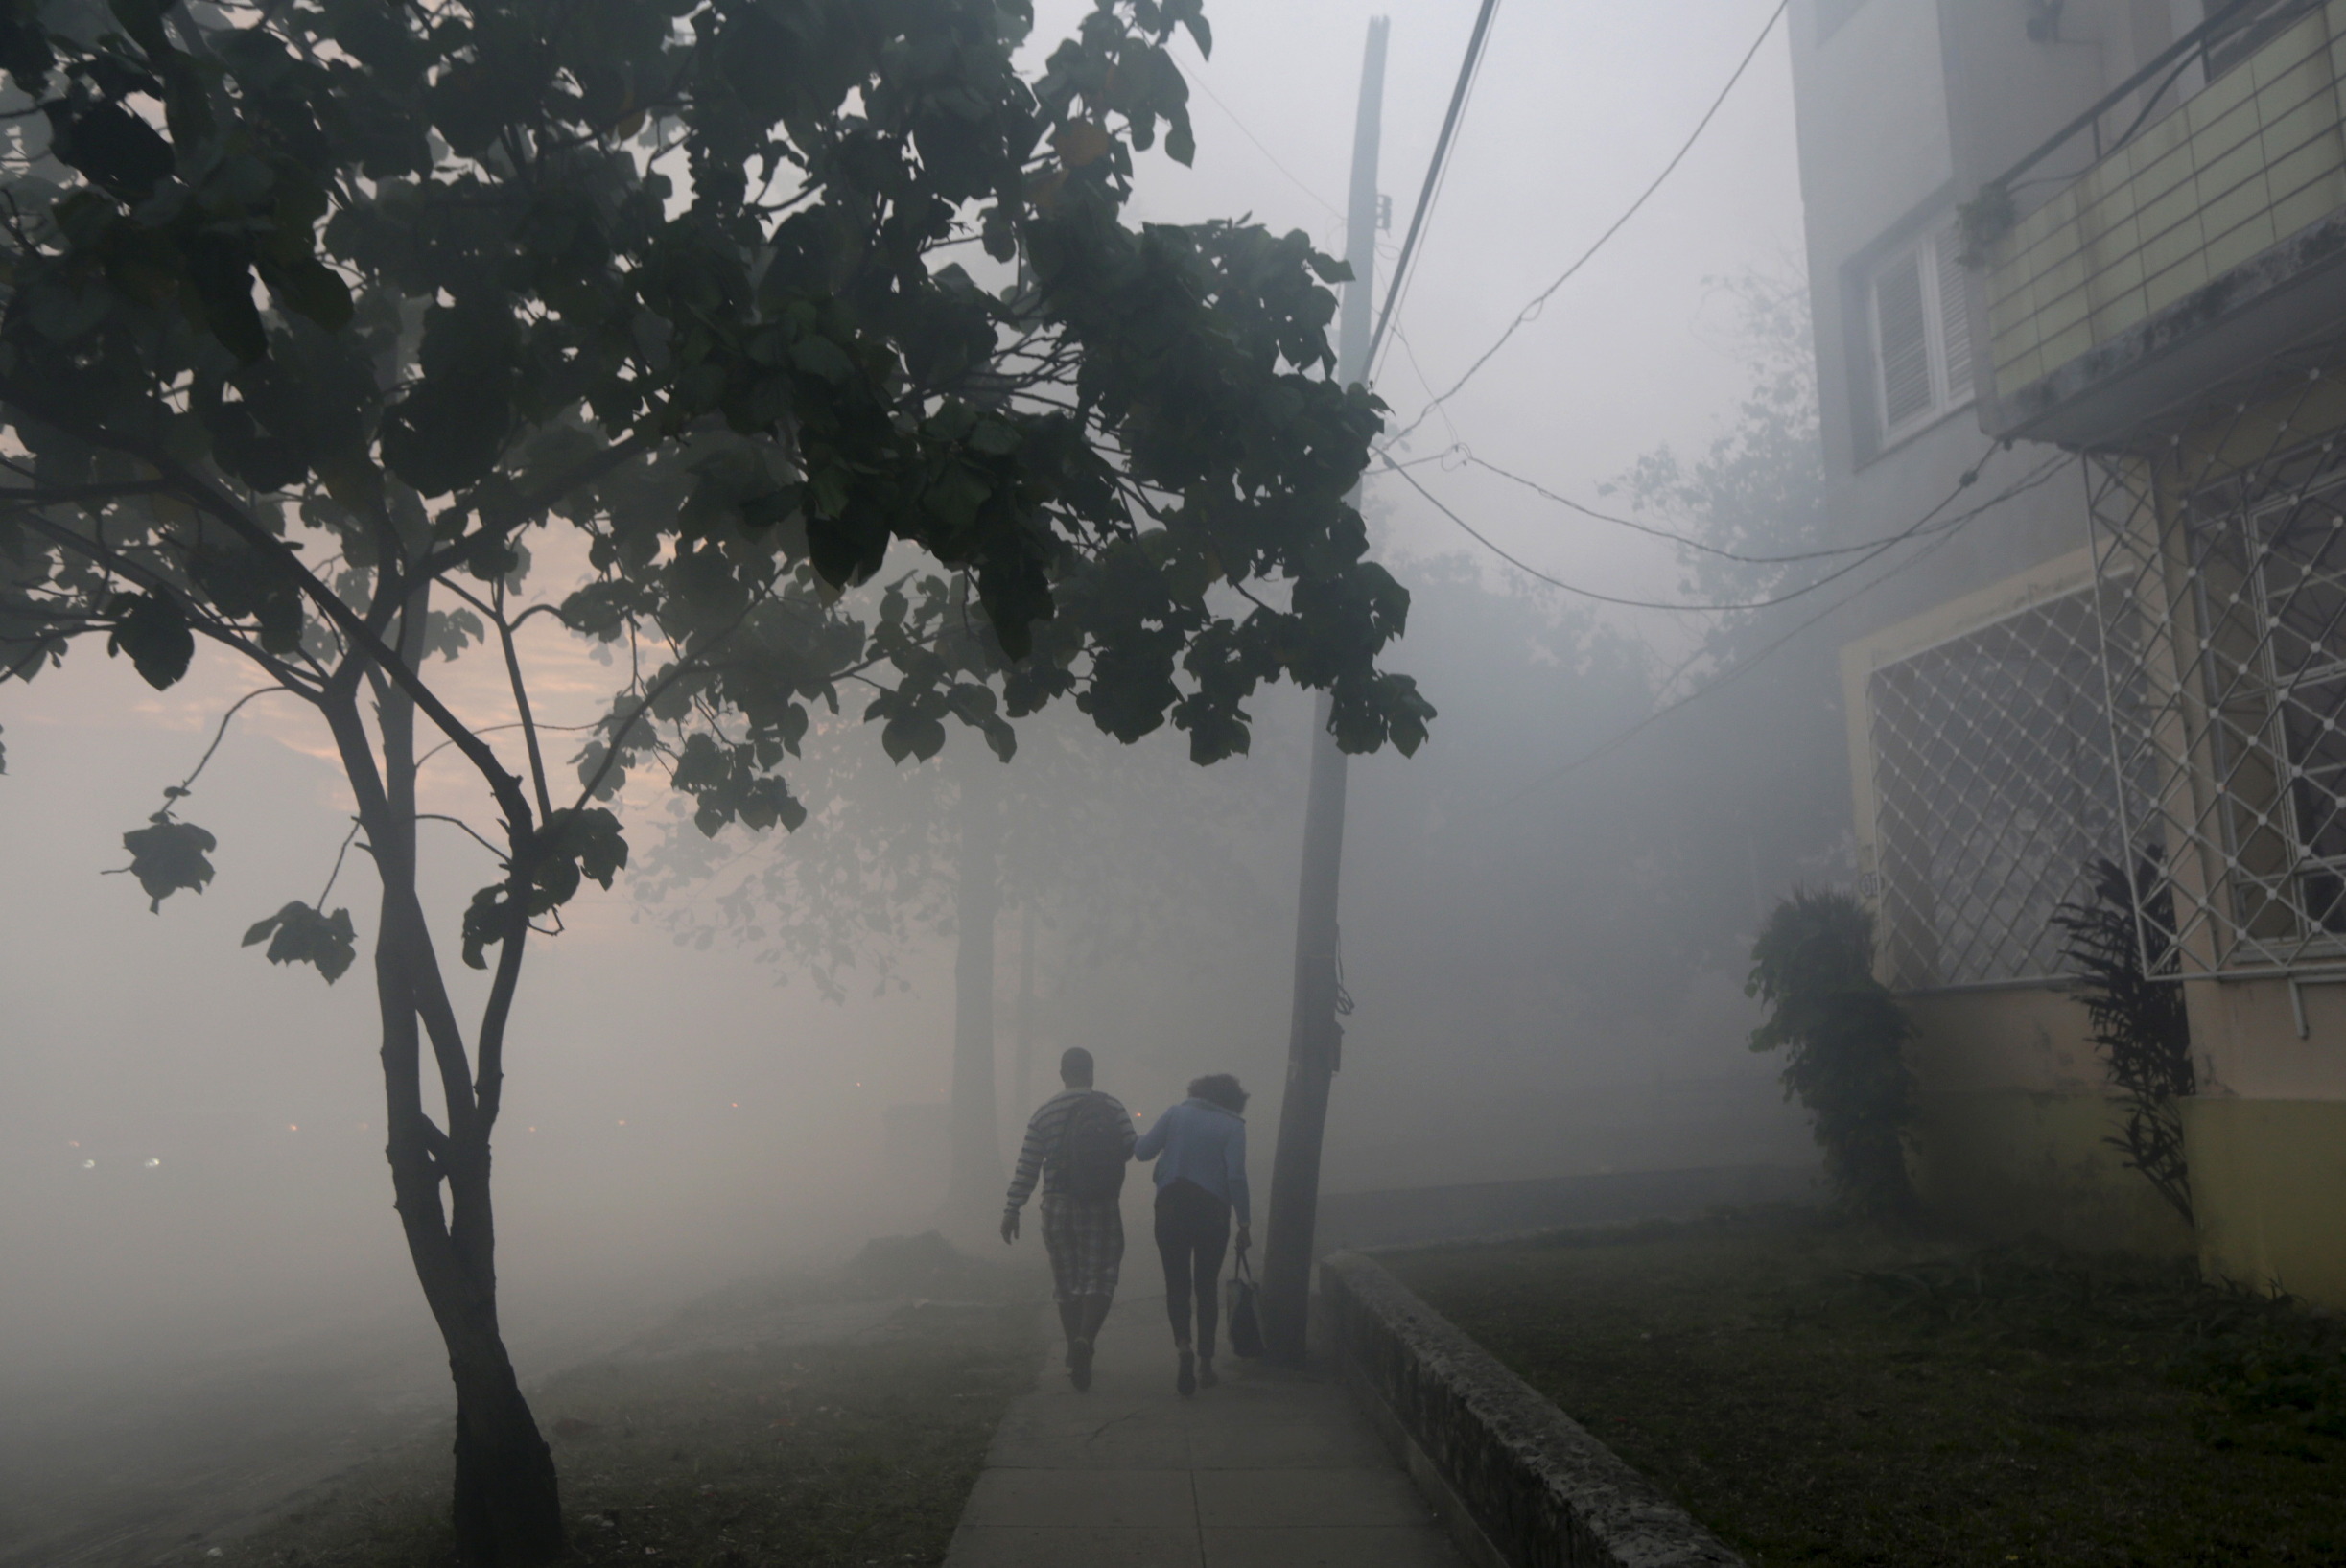 People walk among clouds of insecticide after a fumigating truck moved past in Havana March 1, 2016. Cuba conducts regular fumigation inside homes to check the spread of dengue, a virus transmitted by the Aedes aegypti mosquito that causes a fever which can be deadly. The same mosquito can also spread the Zika virus, although the Cuban government says there have been no reported cases of the disease in the country. REUTERS/Enrique de la Osa - RTS8QQU